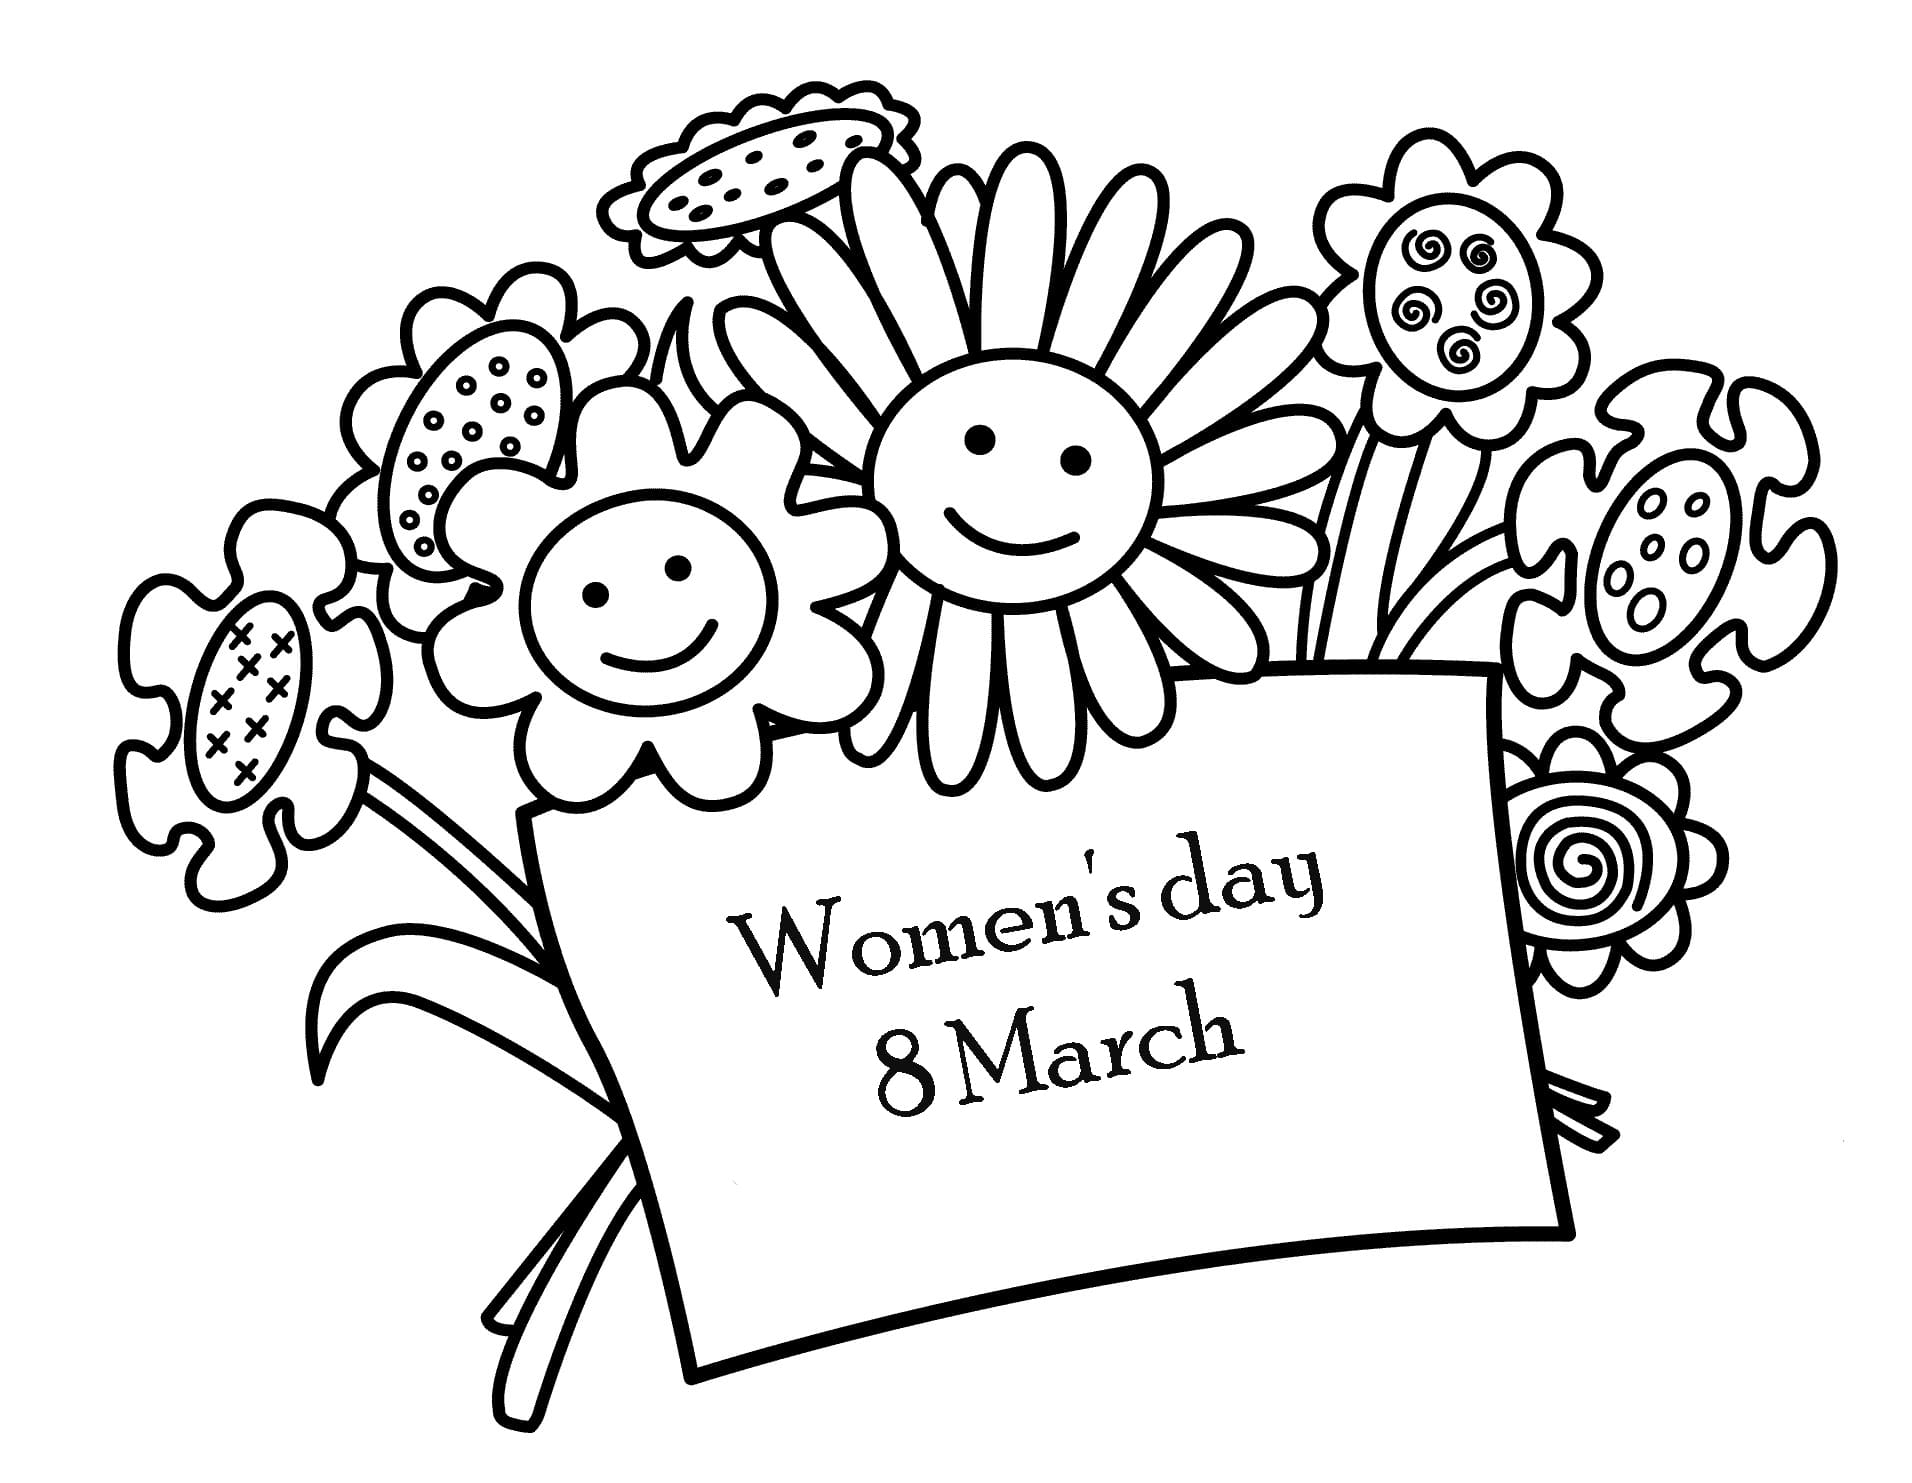 coloring-pages-women-s-day-march-8th-print-and-congratulate-women